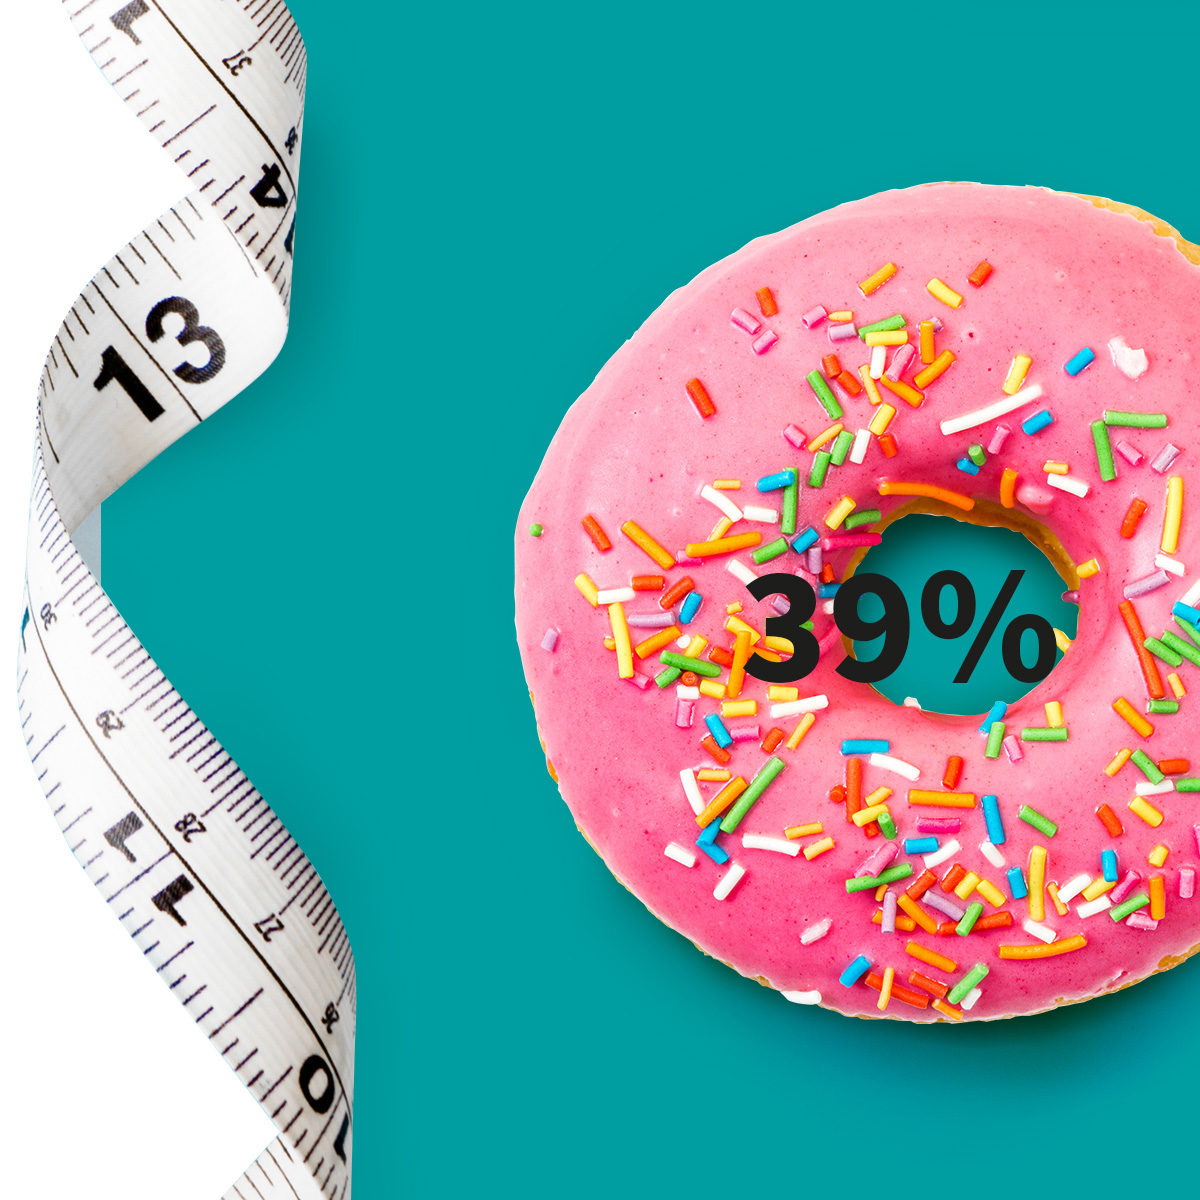 [.ES-es Spain (spanish)] •	A measuring tape and a doughnut with pink icing and colourful sugar sprinkle as a metaphor for obesity